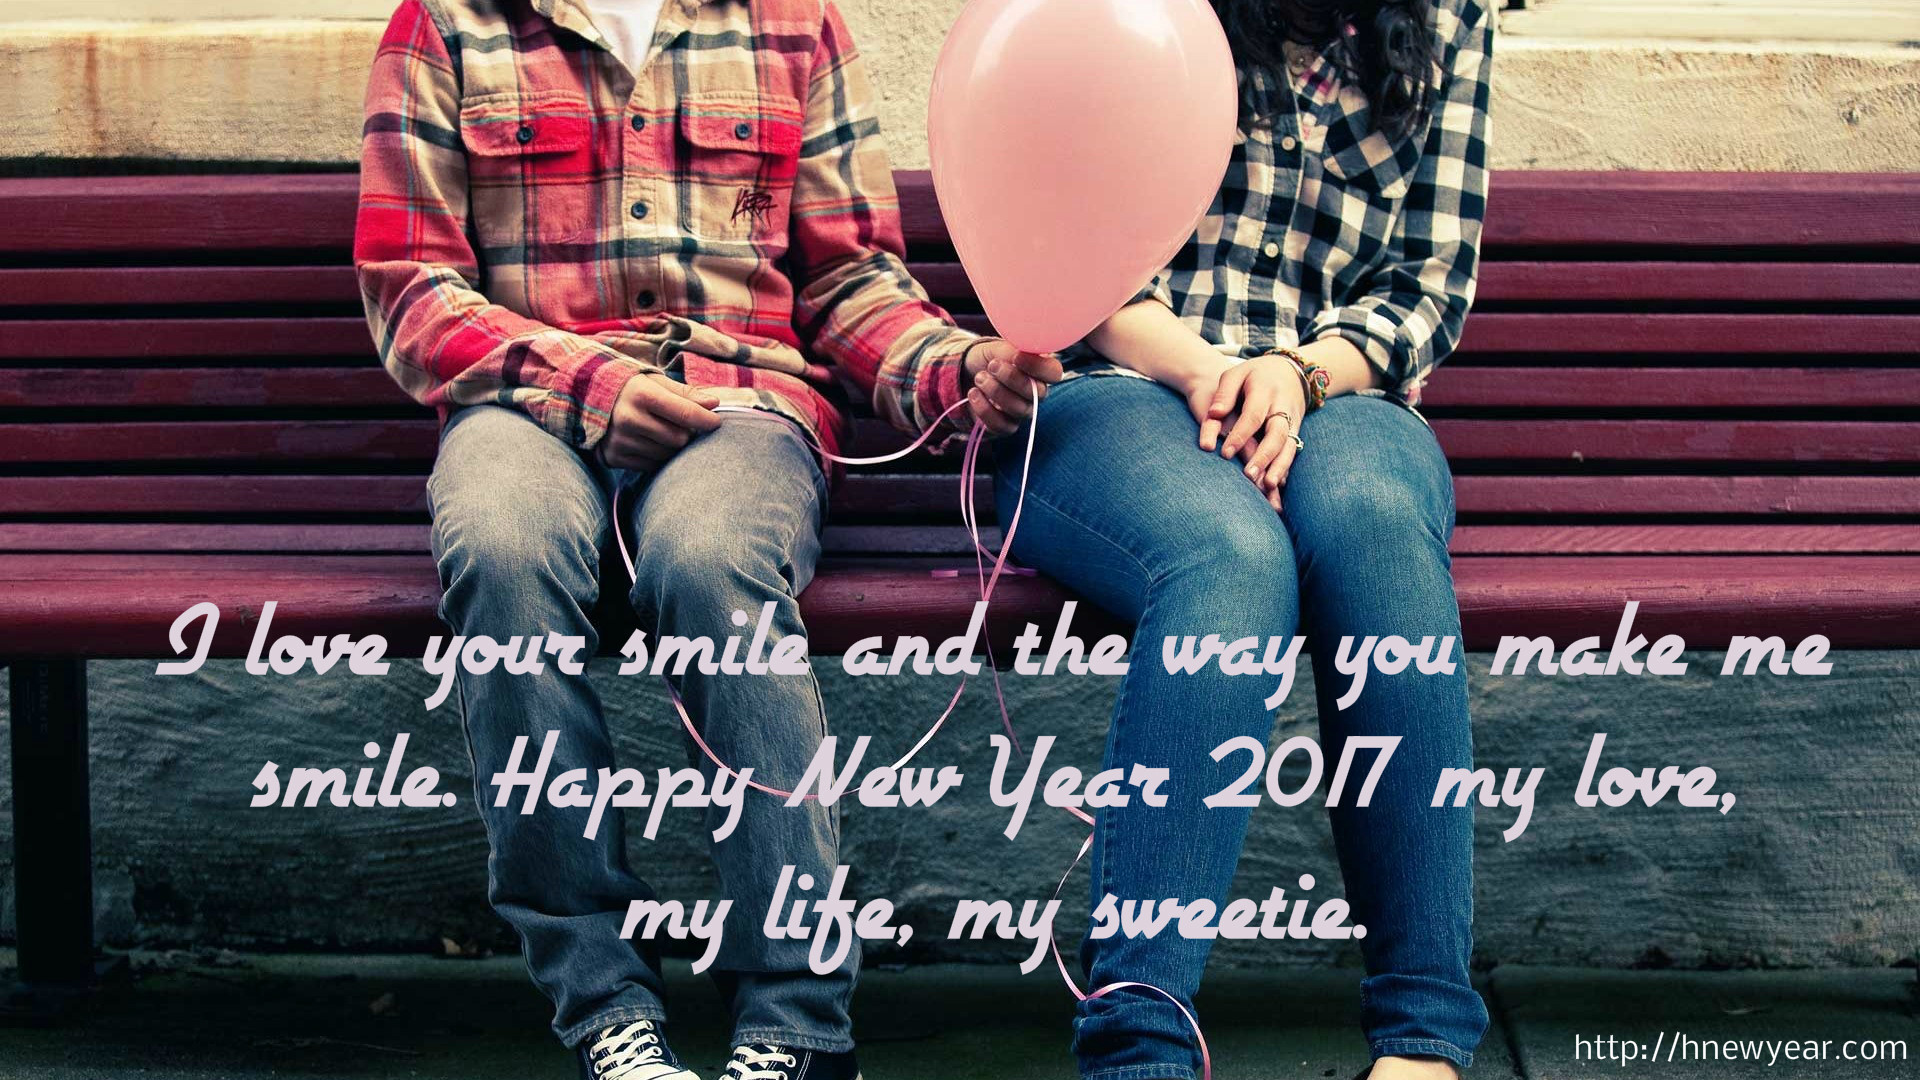 1920x1080 Romantic New Year Wishes for Wife 2017